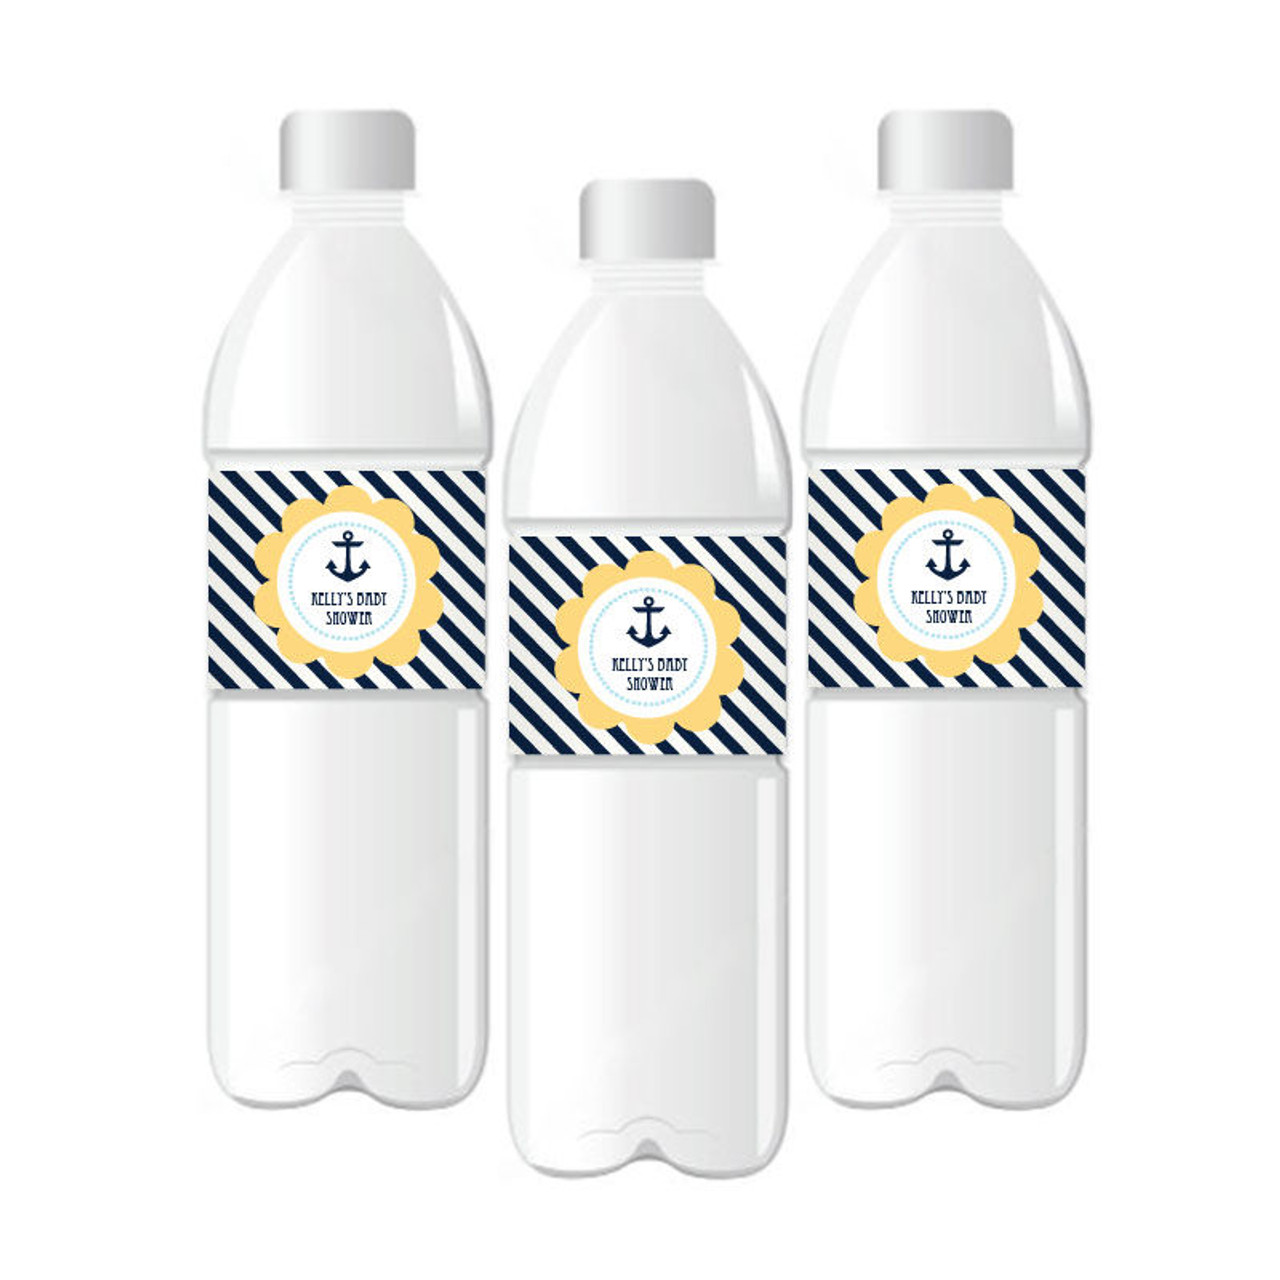 https://cdn11.bigcommerce.com/s-8bfcbt/images/stencil/1280x1280/products/2031/3868/Nautical_Baby_Shower_Personalized_Water_Bottle_Labels__46143.1519174842.jpg?c=2